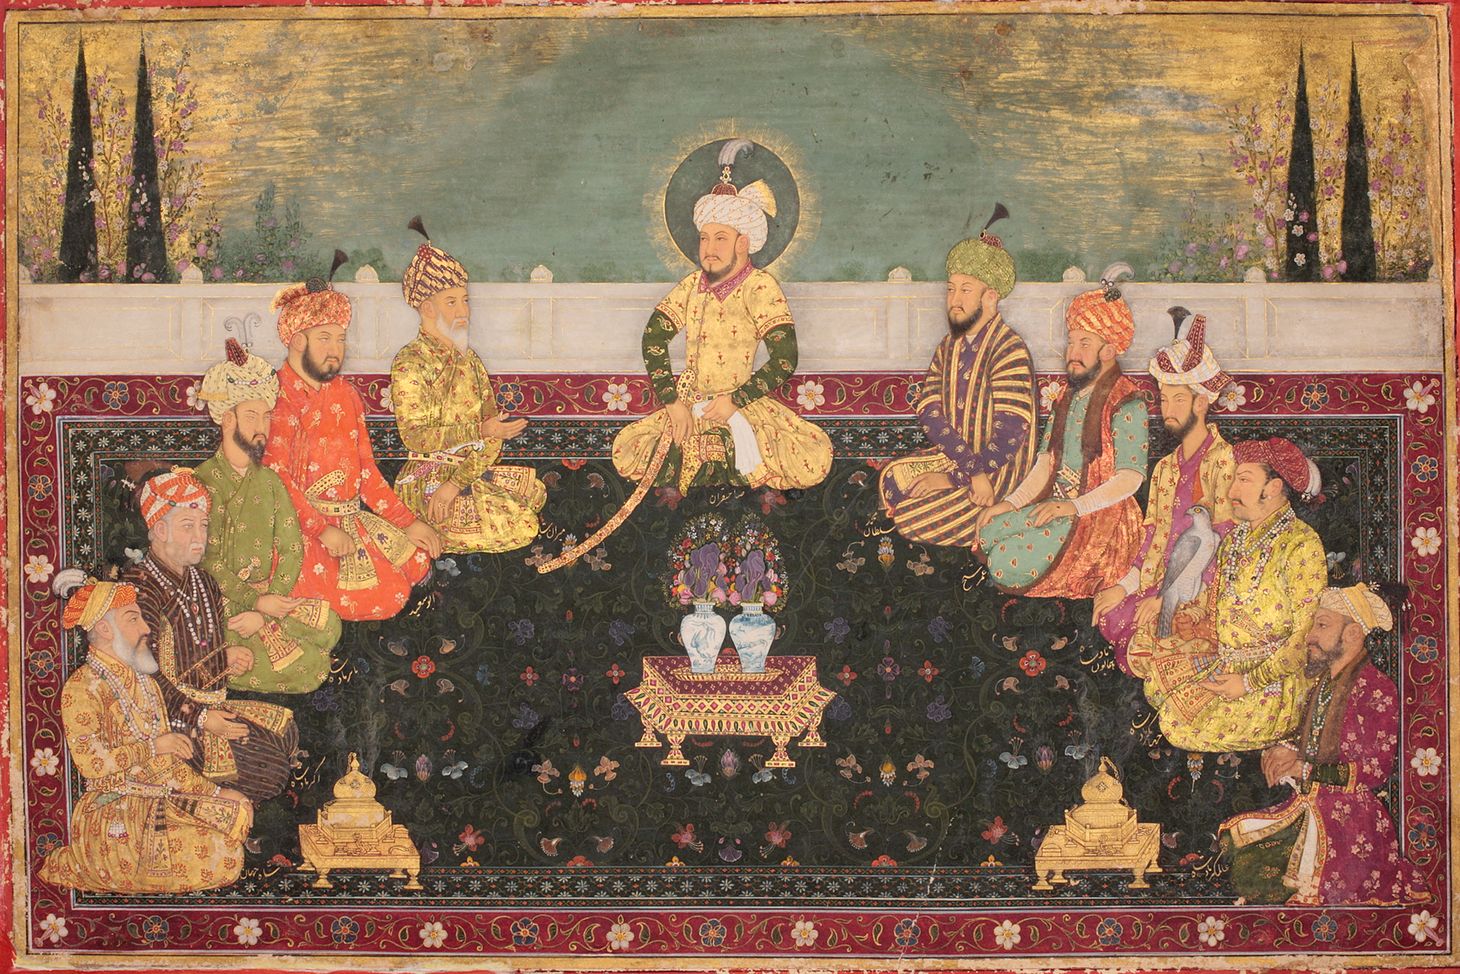 “A Generous Gift from Timur and Akbar”: Snapshots from the Mughal Empire